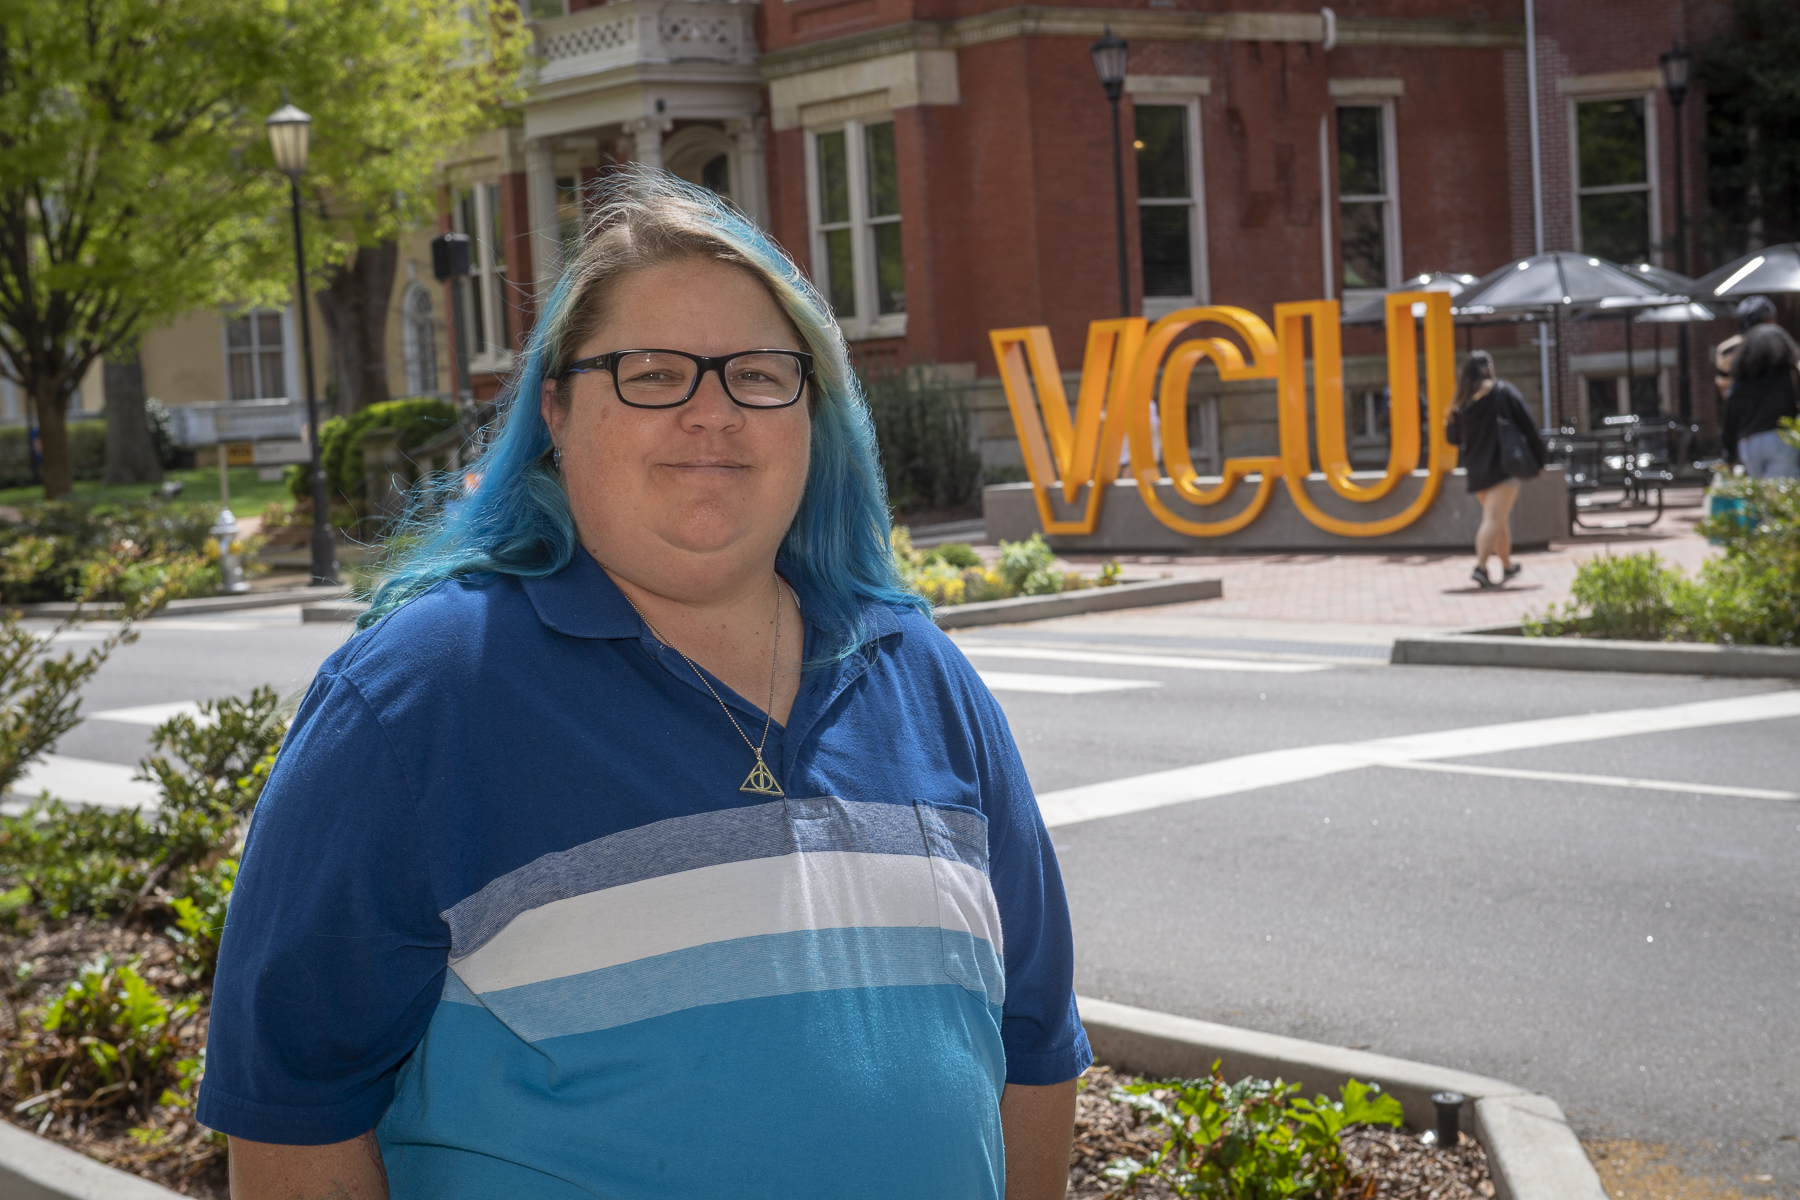 A person with dyed blue hair wearing a blue shirt in front of the V C U sign on Franklin St